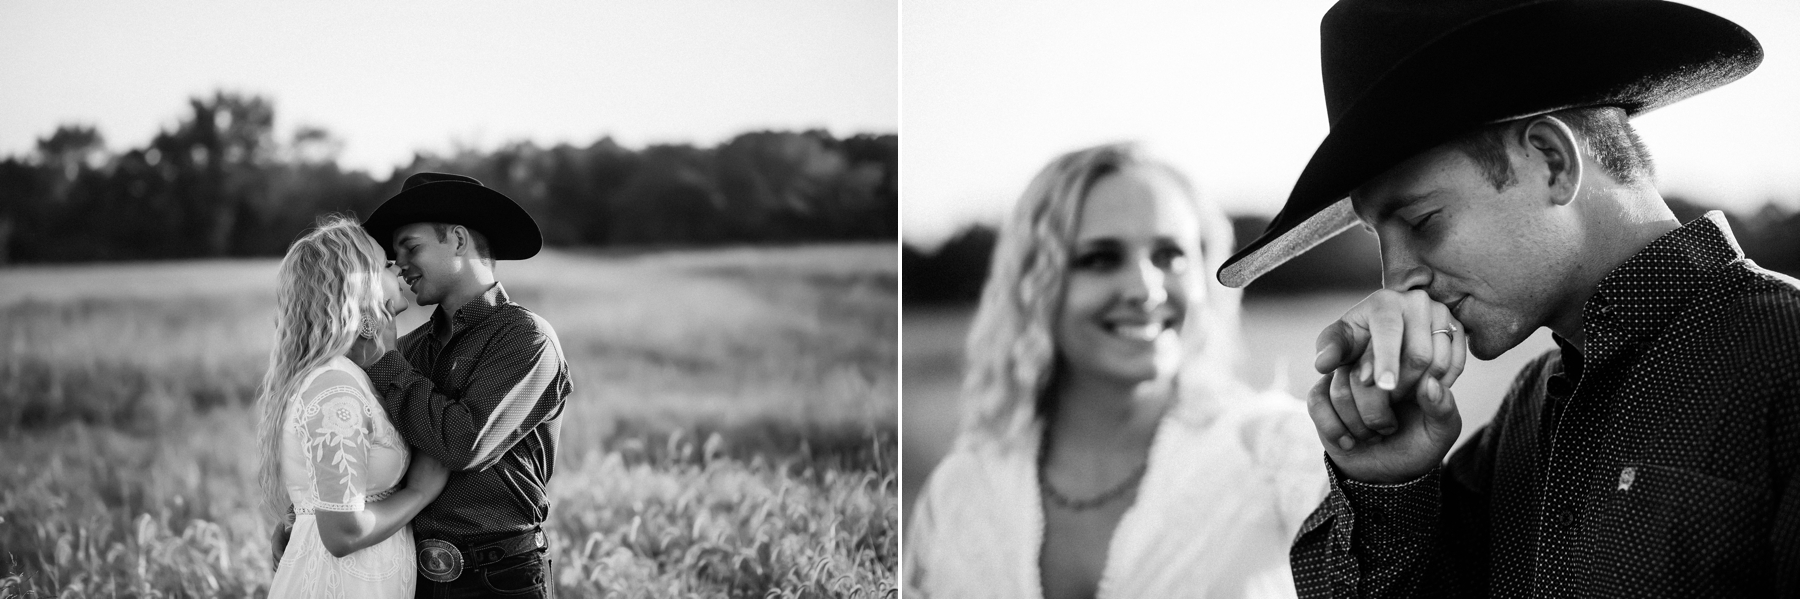 Hannah & Justin Engagement Session Outdoor Nature Country Brittany Jewell Photography golden hour vibes